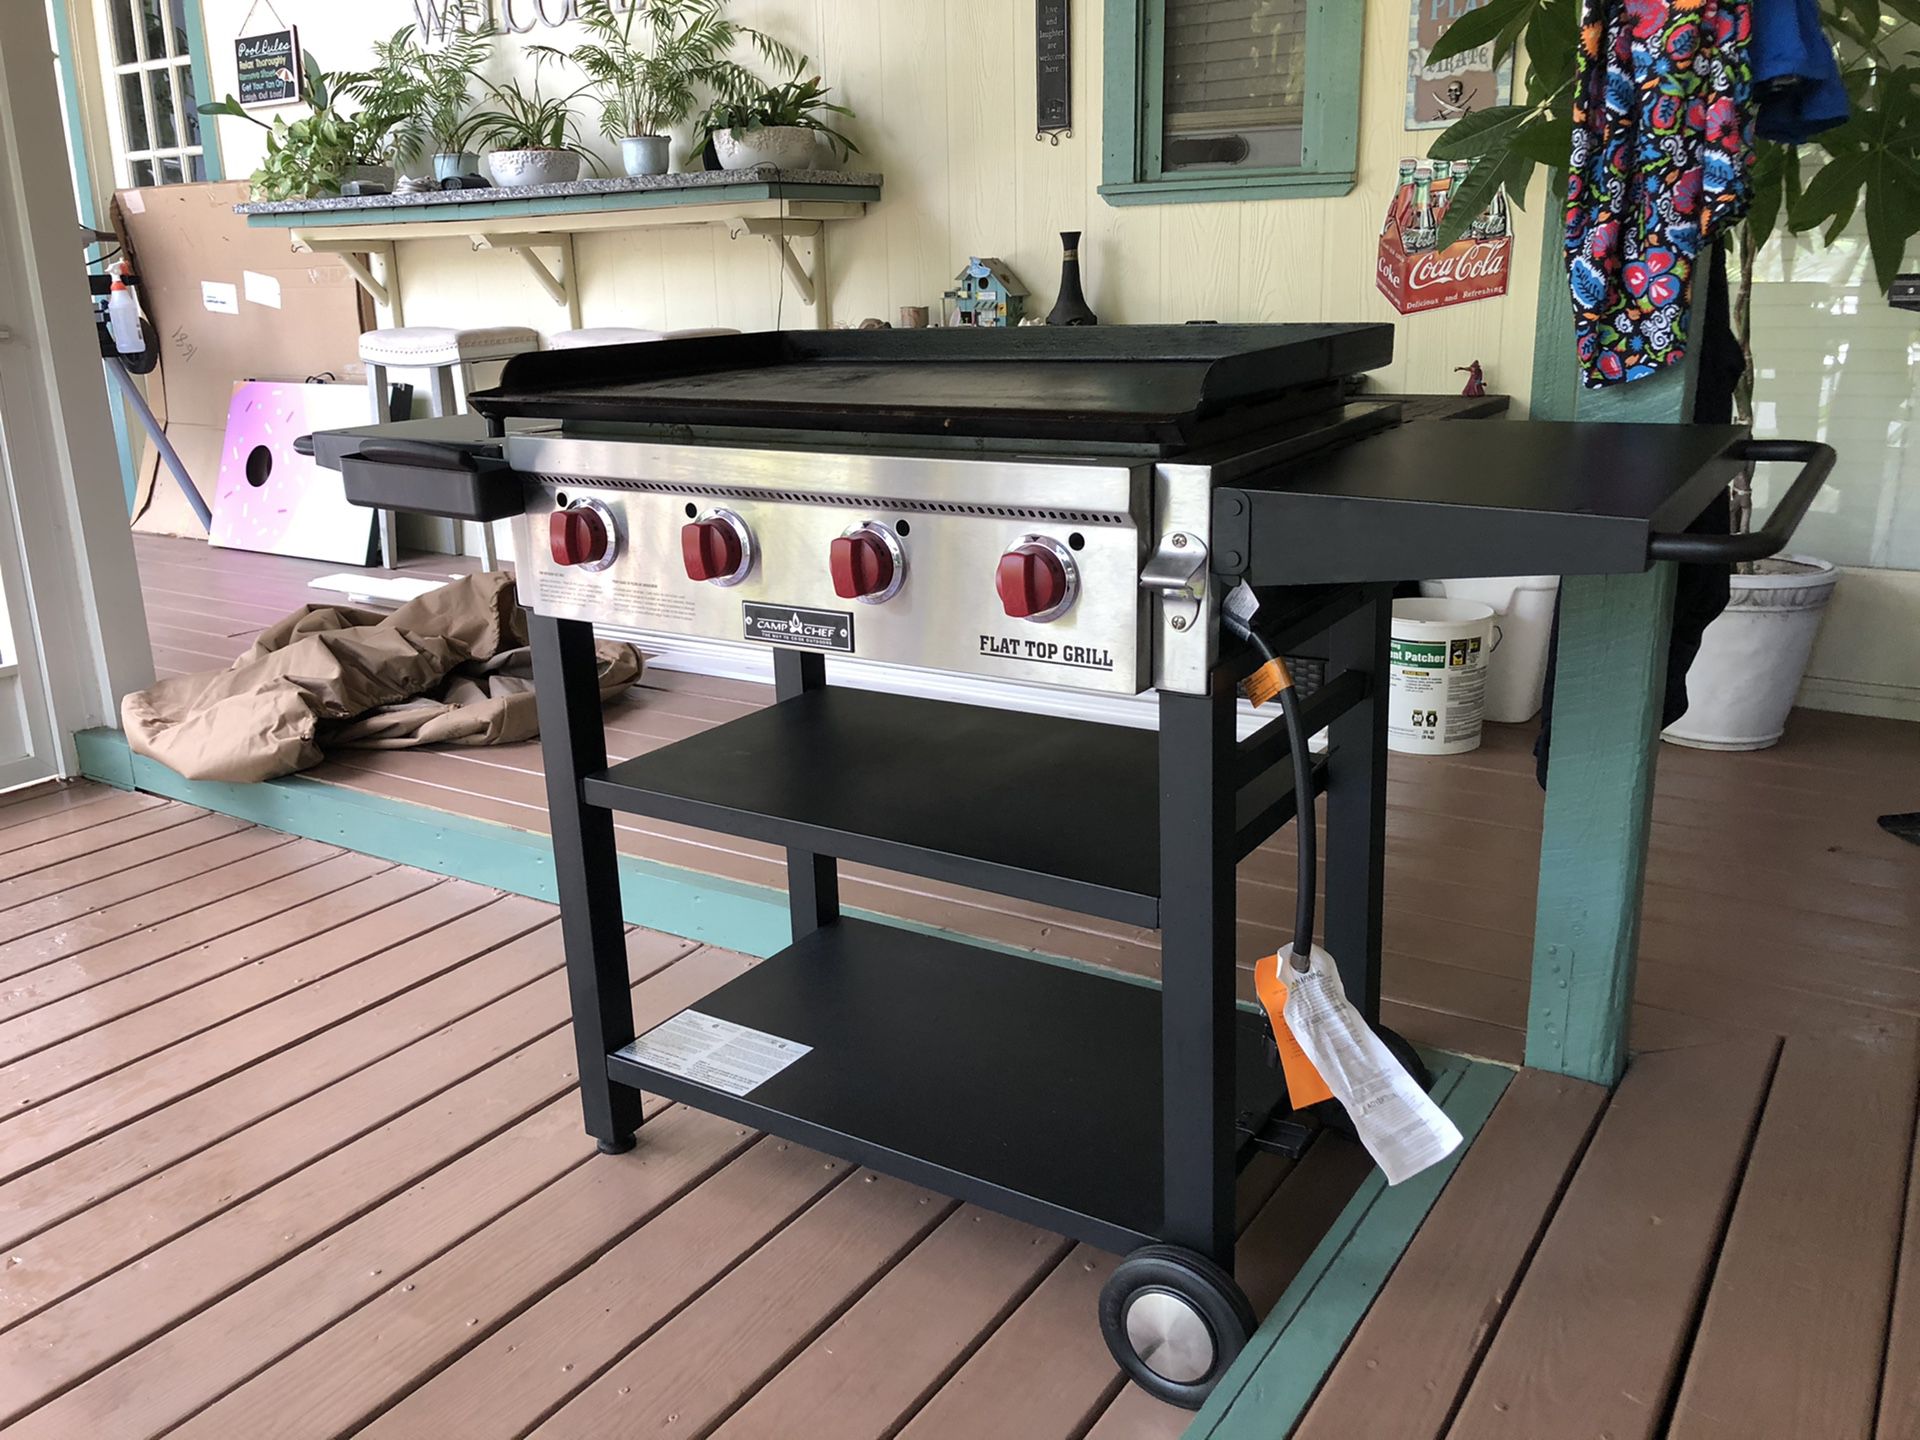 Camp Chef - flat top and grate grill.